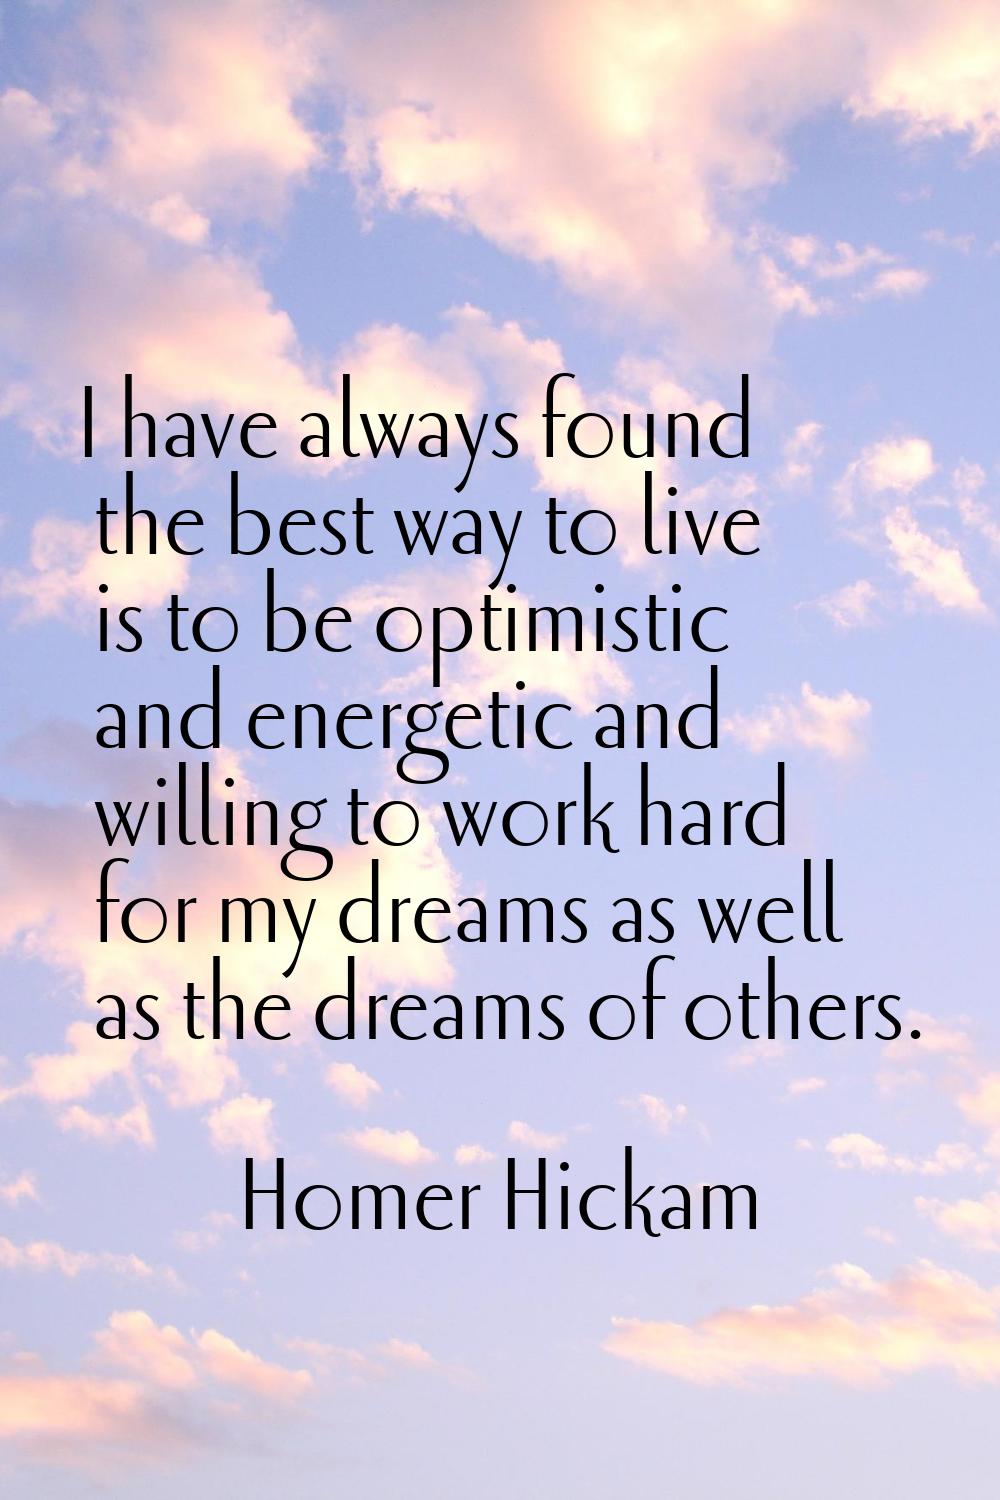 I have always found the best way to live is to be optimistic and energetic and willing to work hard